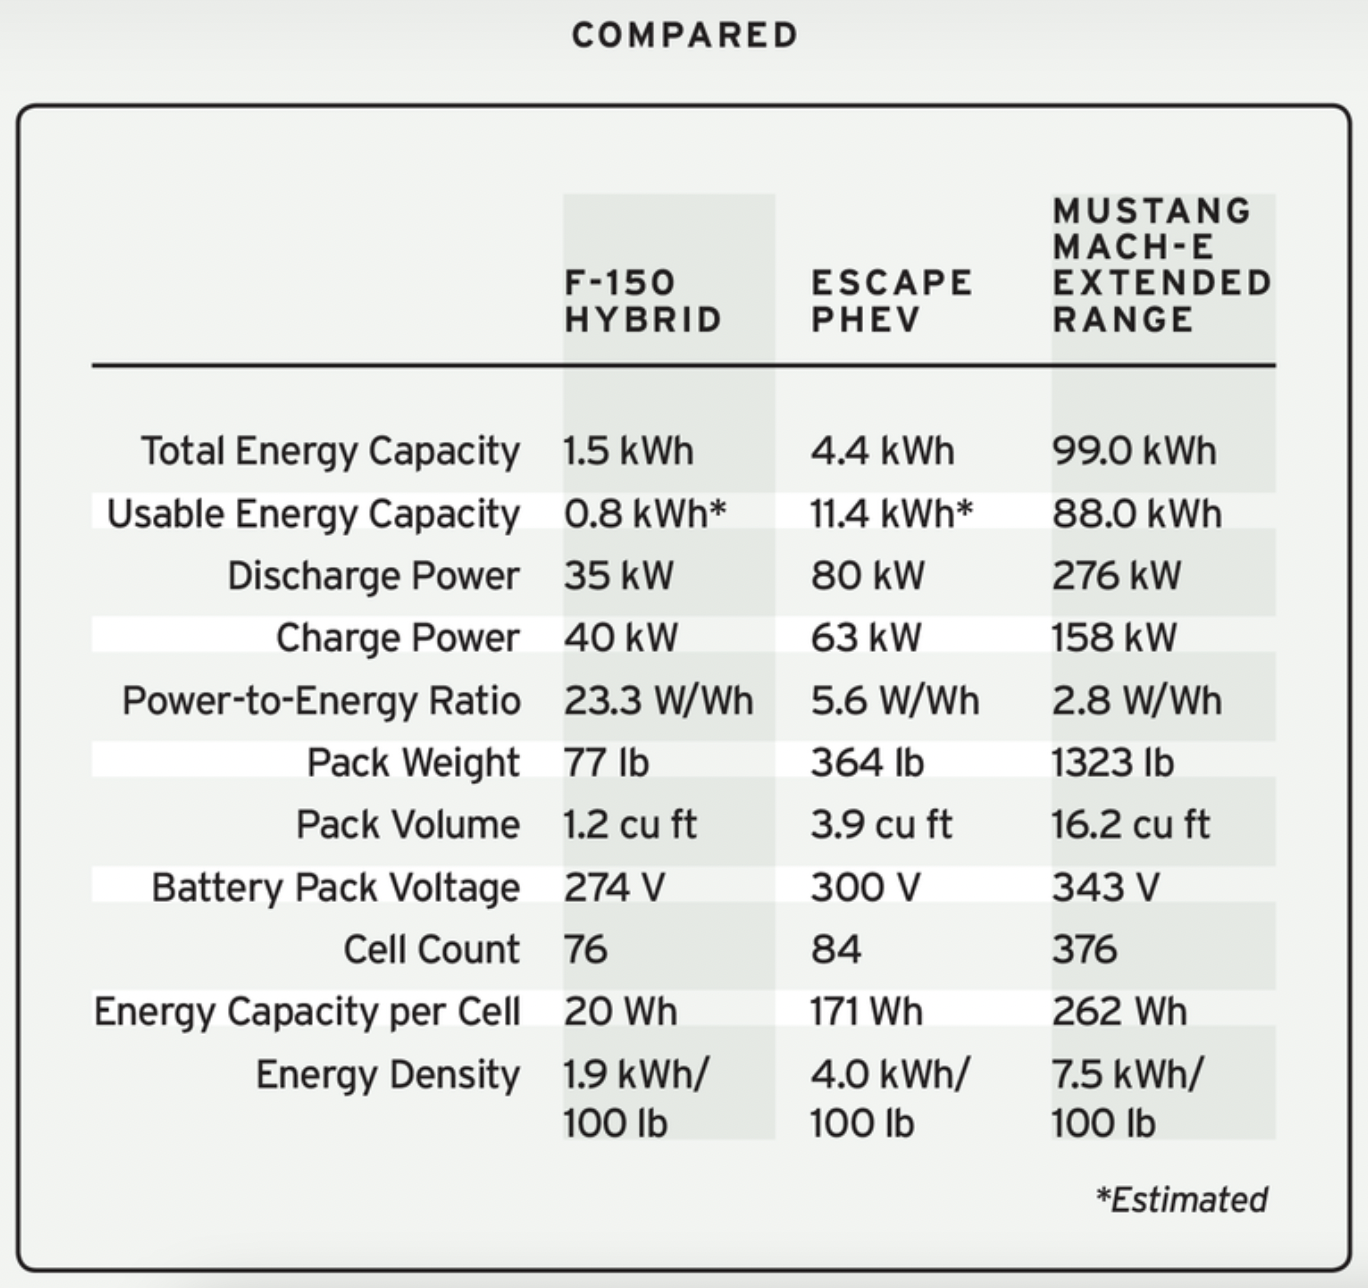 Battery Taxonomy The Differences between Hybrid and EV Batteries